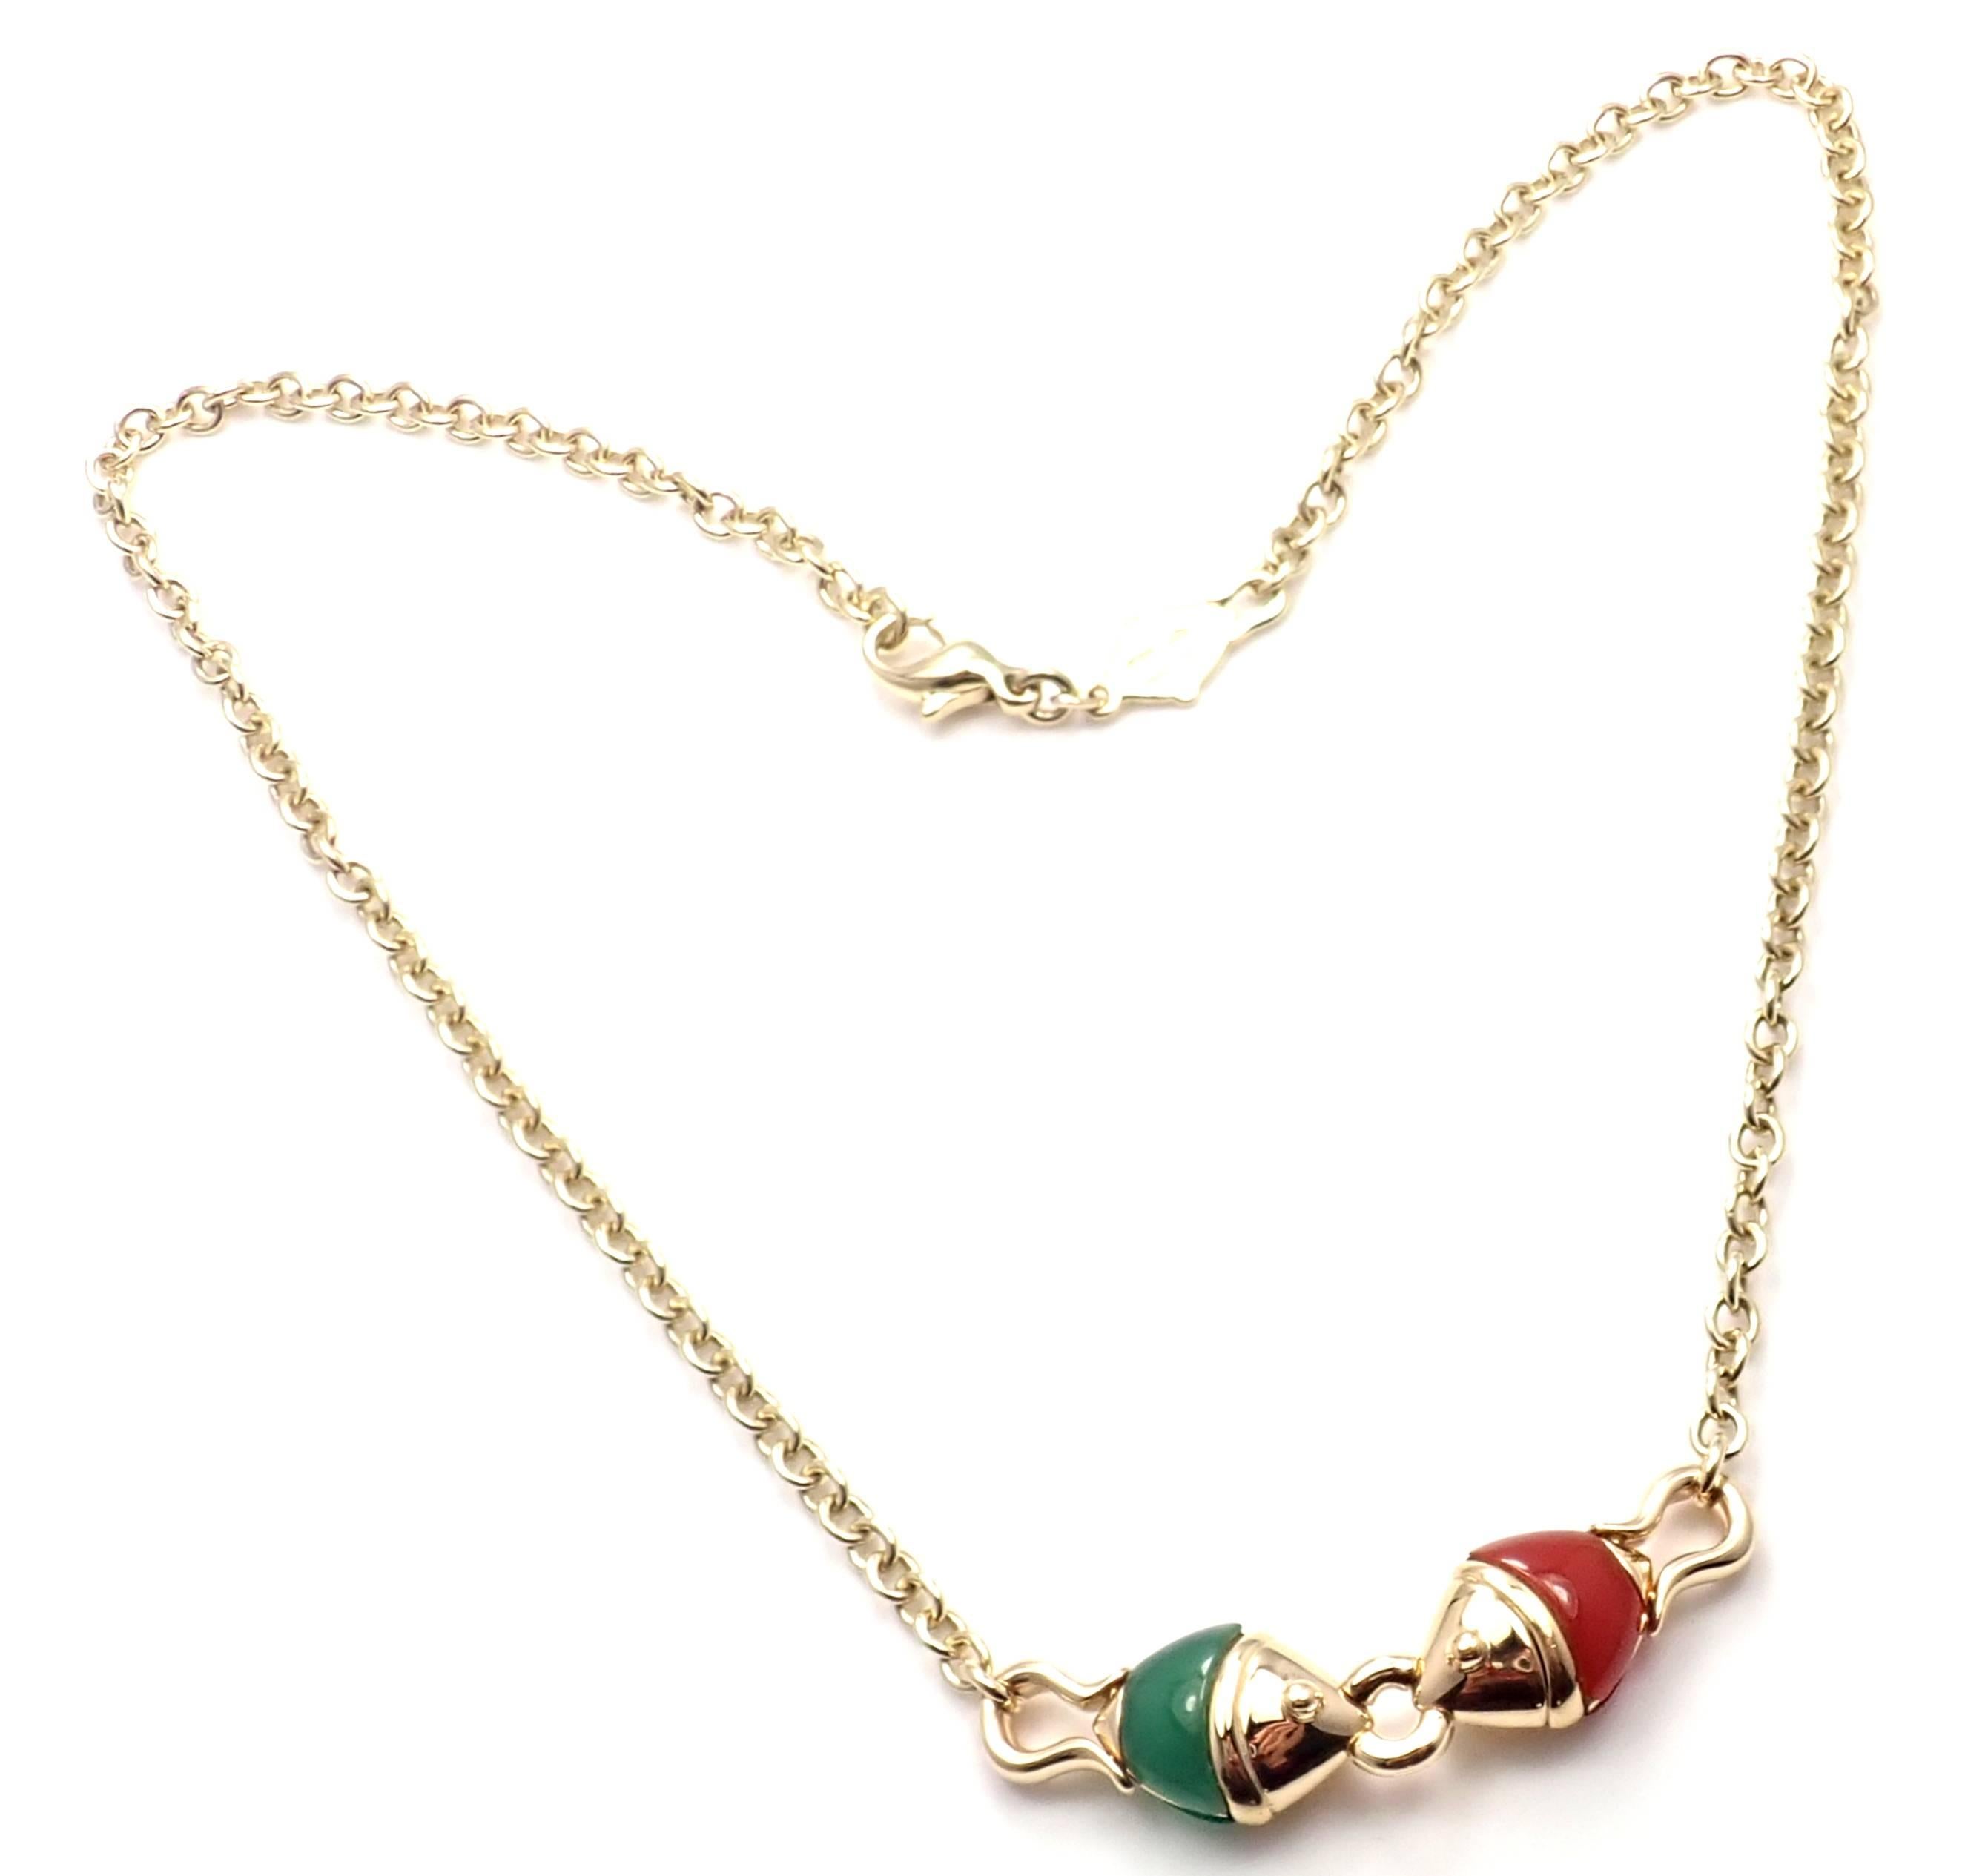 18k Yellow Gold Chrysoprase And Carnelian Naturalia Fish Necklace by Bulgari. 
With 2 Chrysoprase stones
2 Carnelian stones
Details: 
Length: 16 3/4